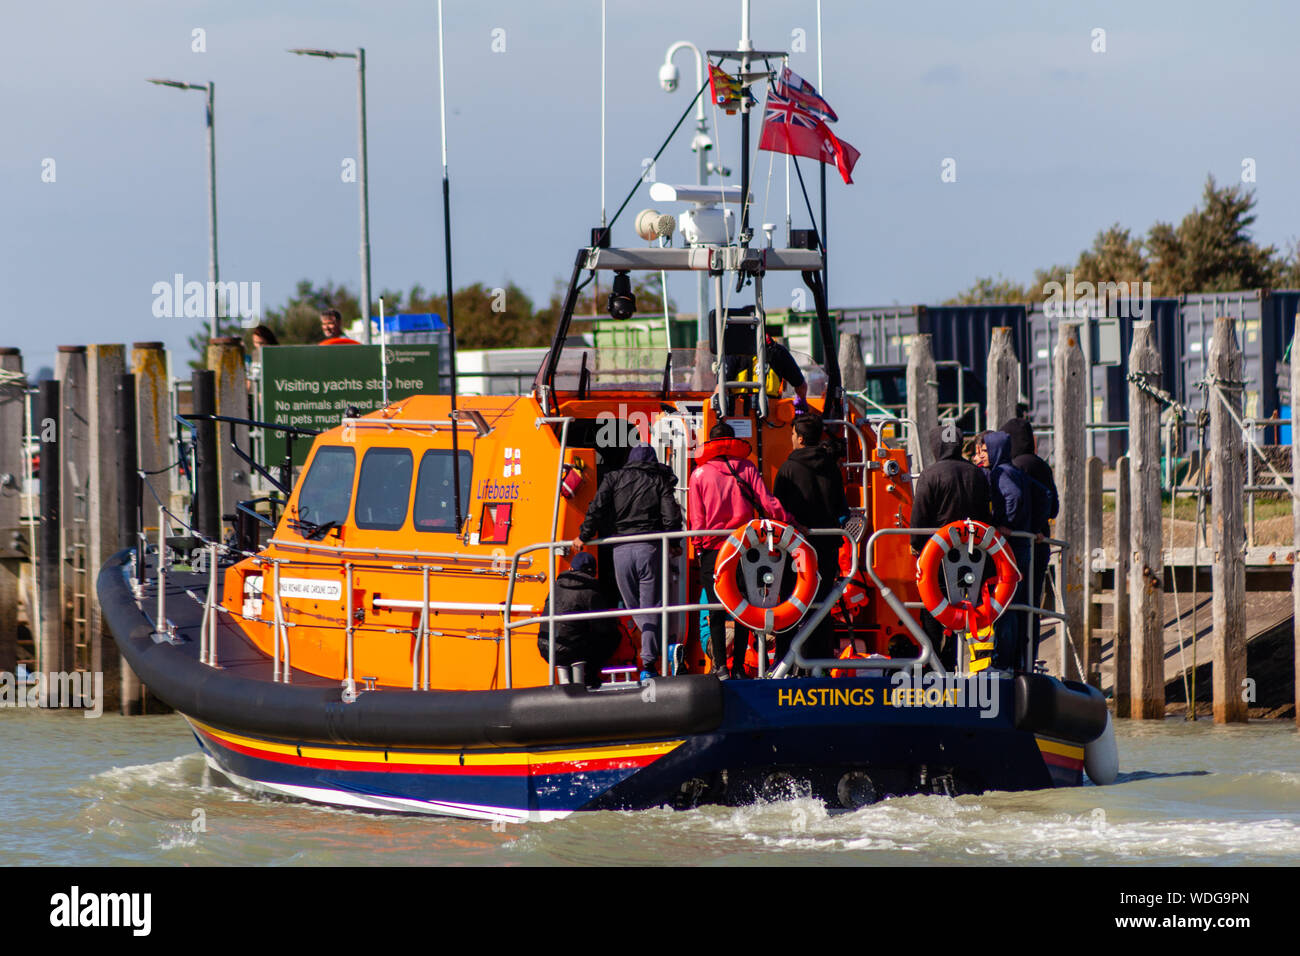 Migrants onboard an RNLI Lifeboat Stock Photo